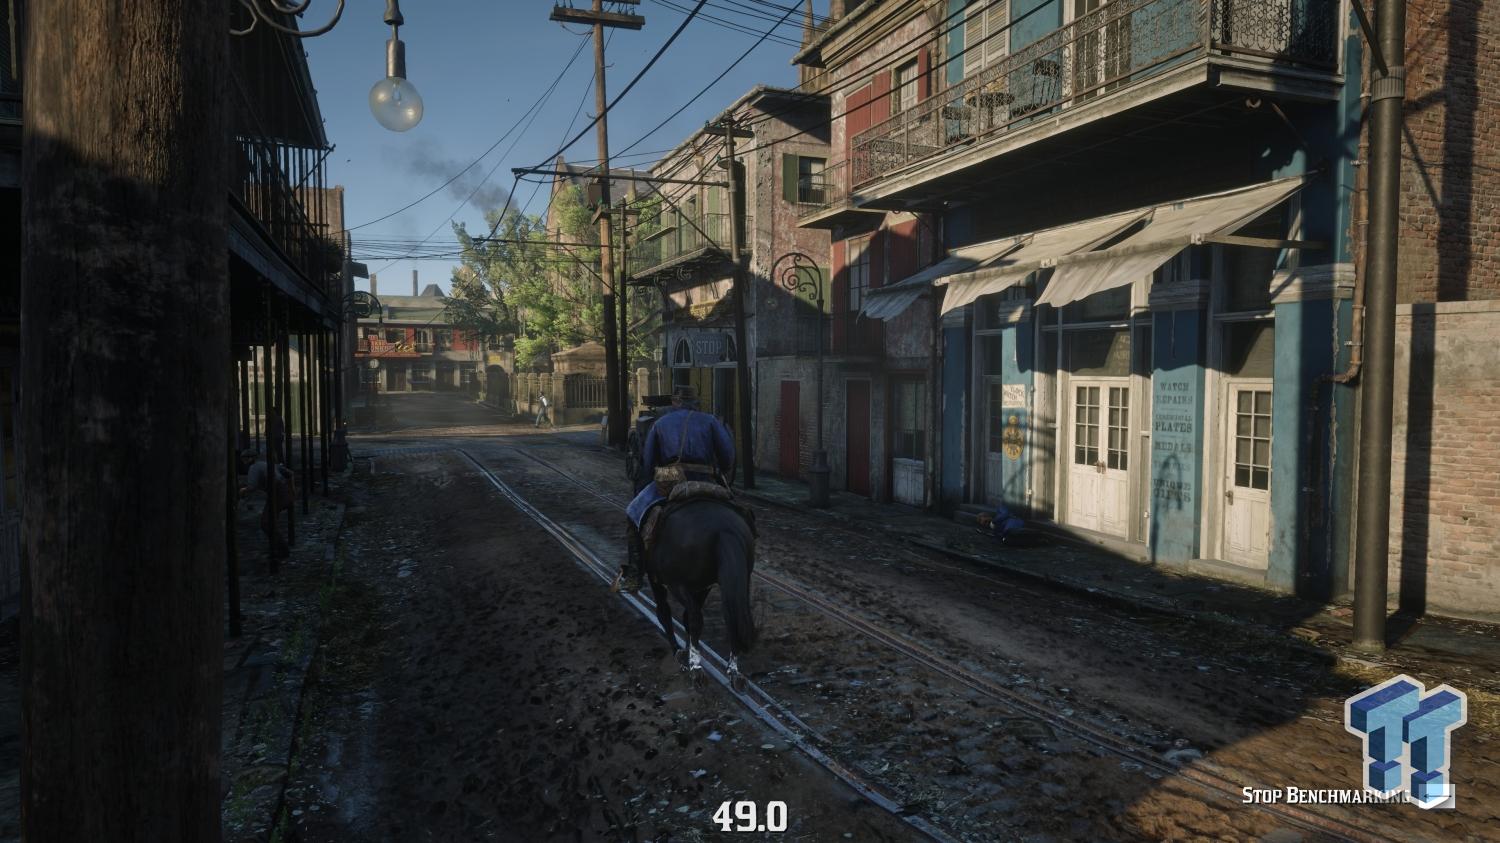 DLSS can make details in games look even better than TAA, DLSS is set to  quality mode, Red Dead Redemption 2. : r/nvidia